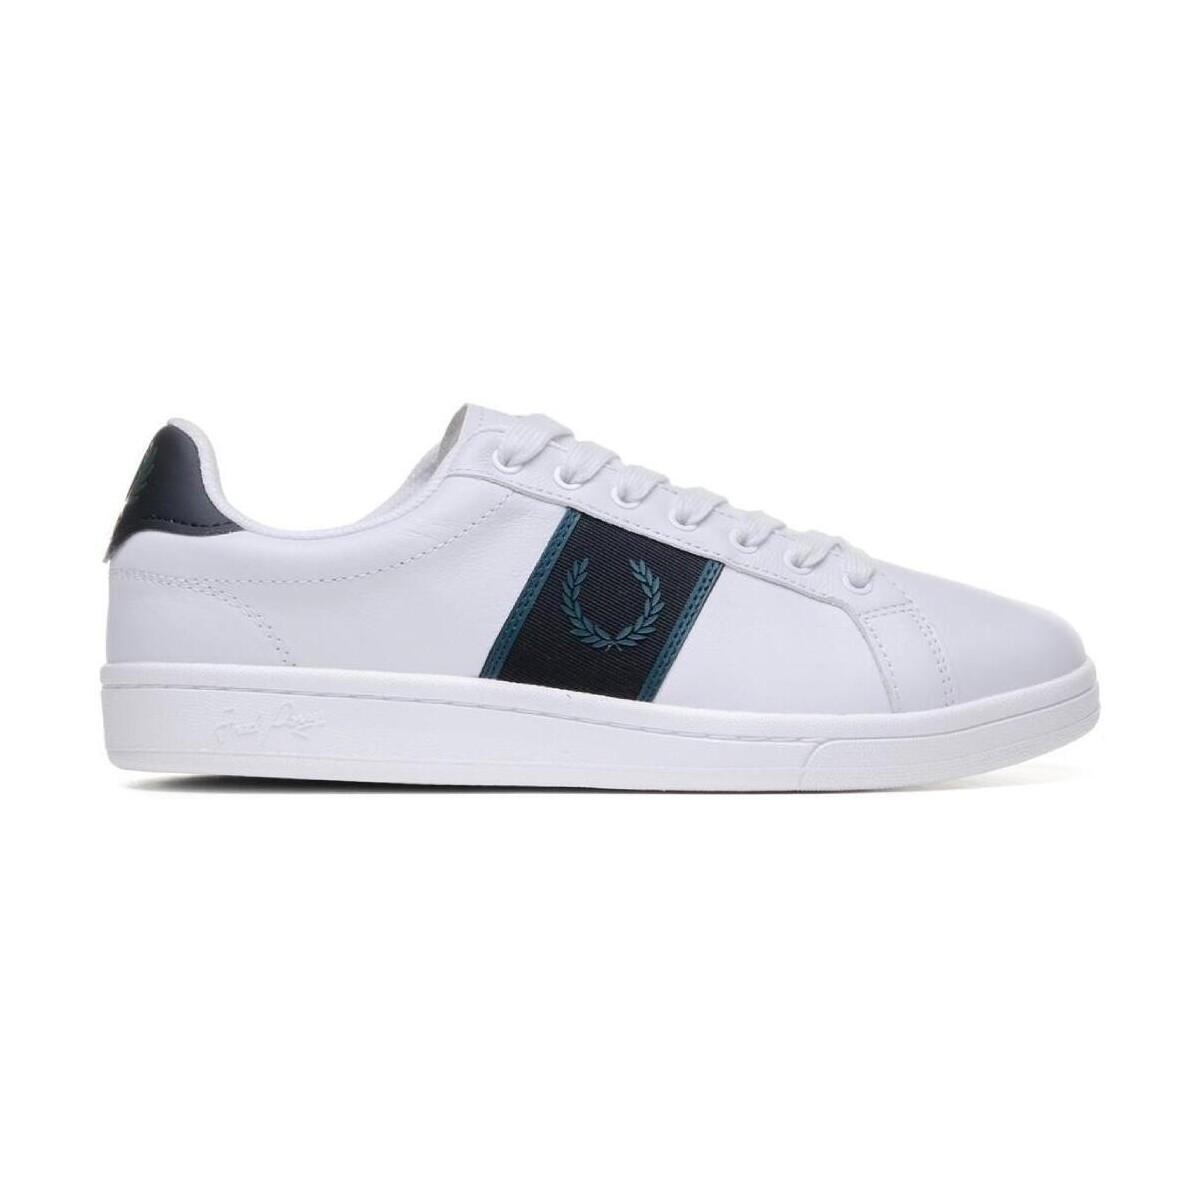 Scarpe Uomo Sneakers basse Fred Perry  Bianco